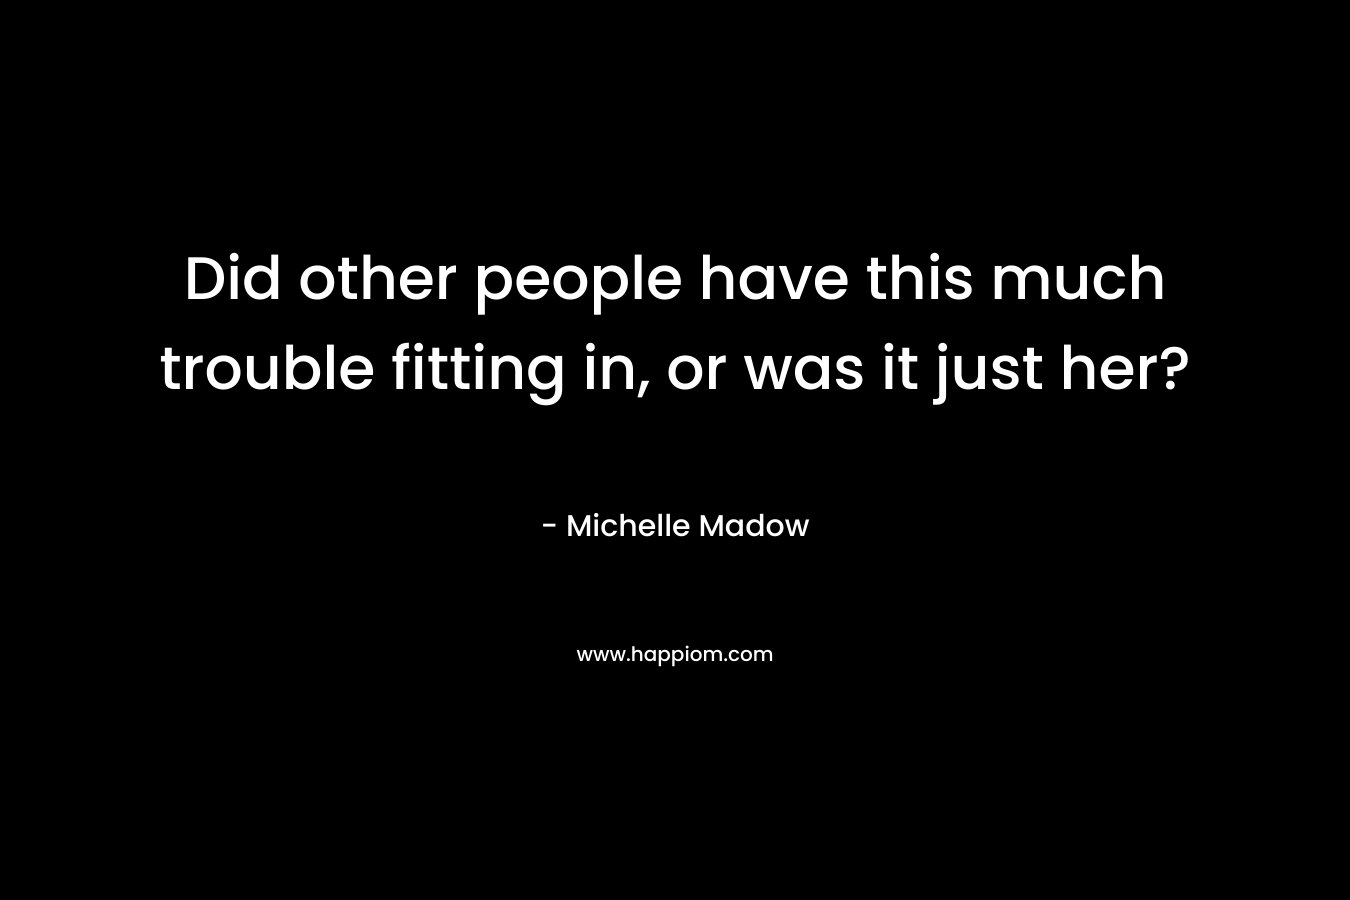 Did other people have this much trouble fitting in, or was it just her? – Michelle Madow